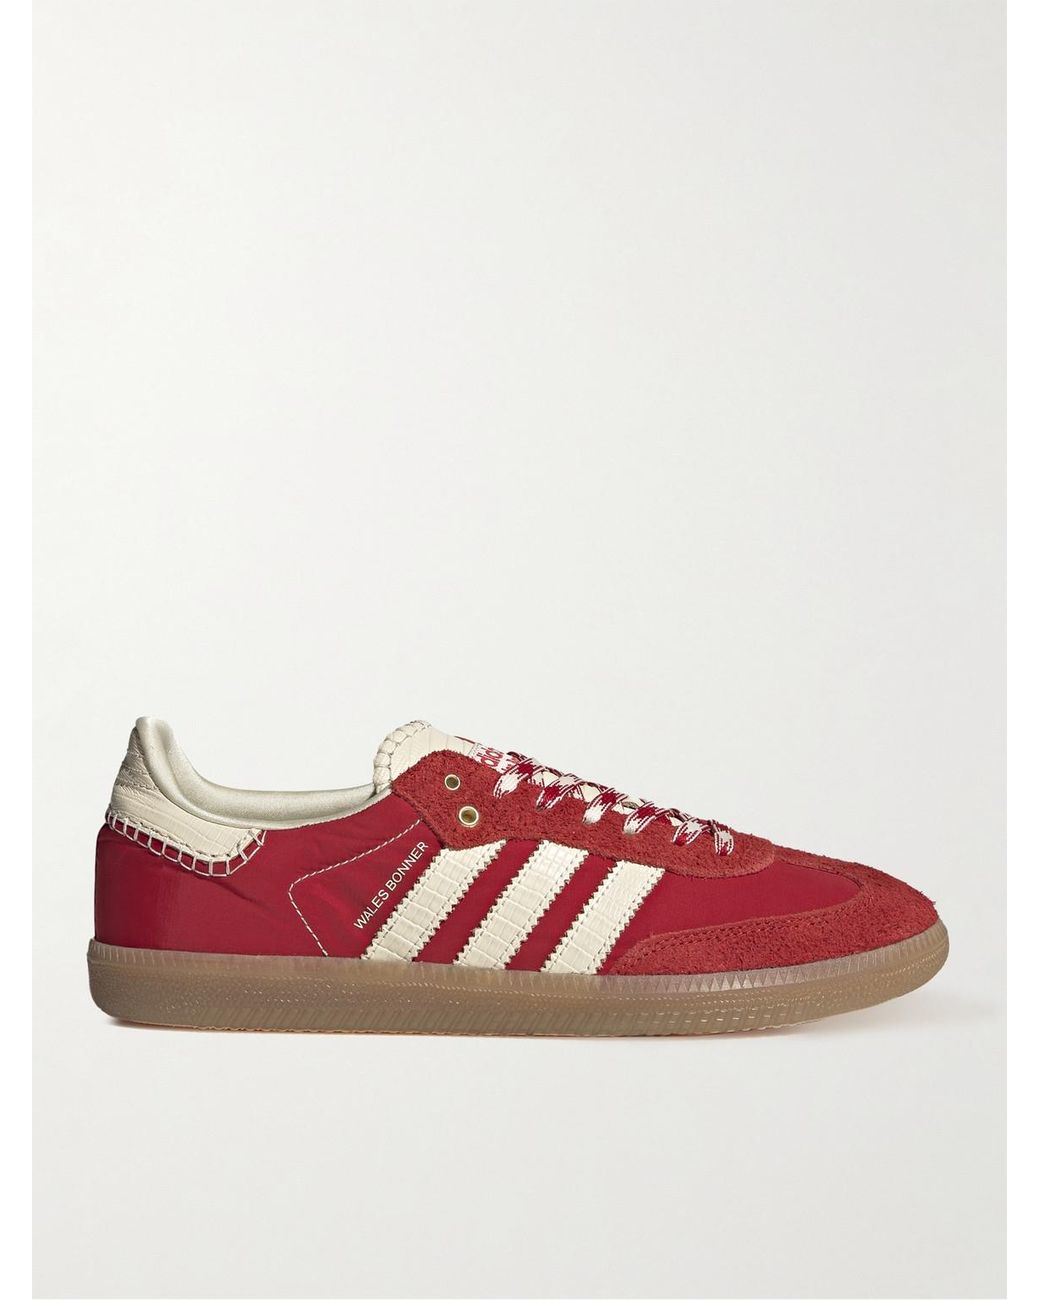 adidas Originals Wales Bonner Samba Suede And Croc-effect Leather ...